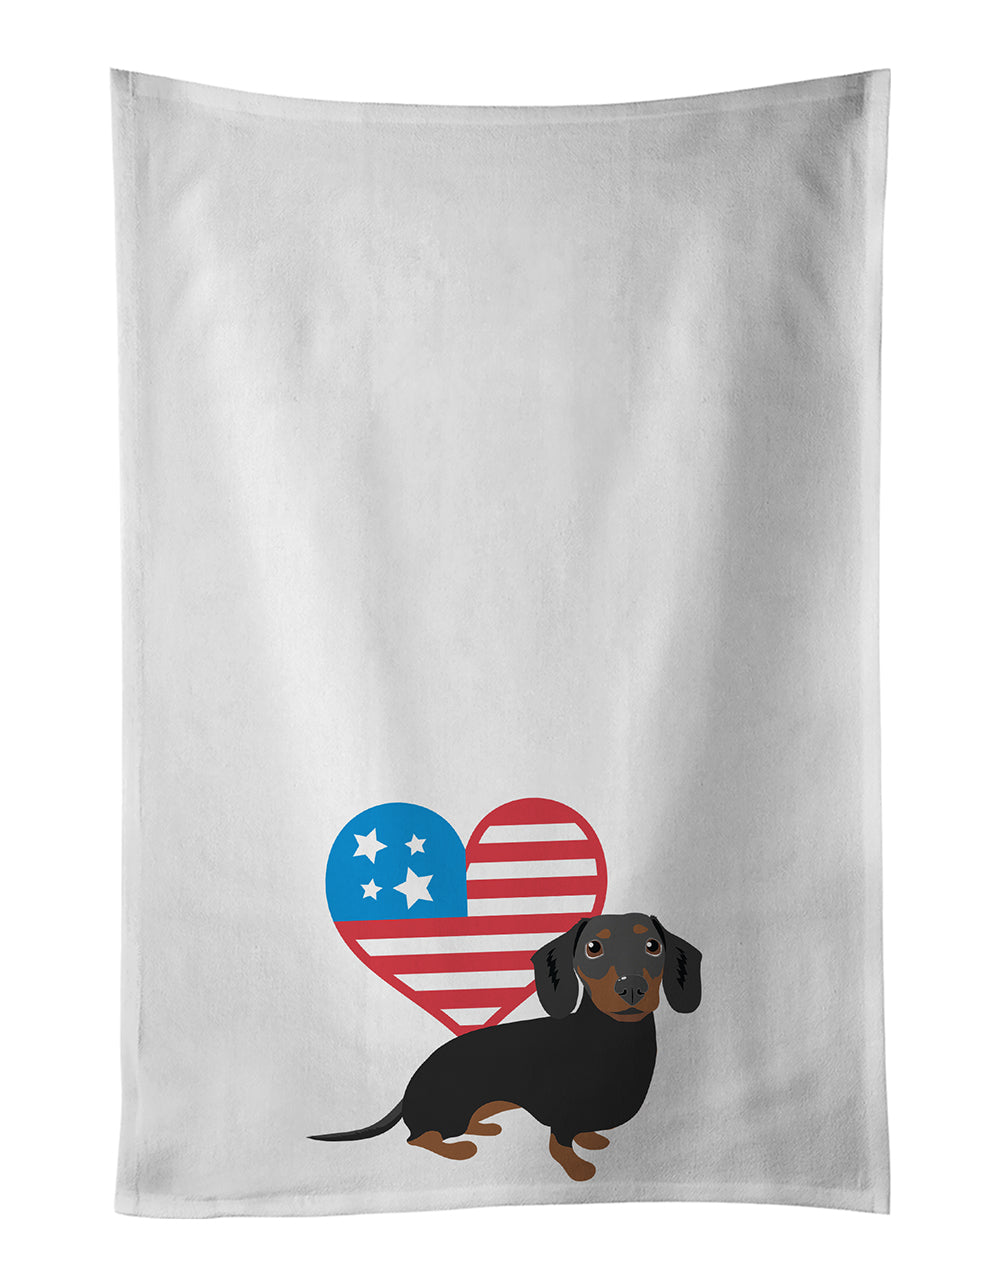 Buy this Dachshund Black and Tan #1Patriotic White Kitchen Towel Set of 2